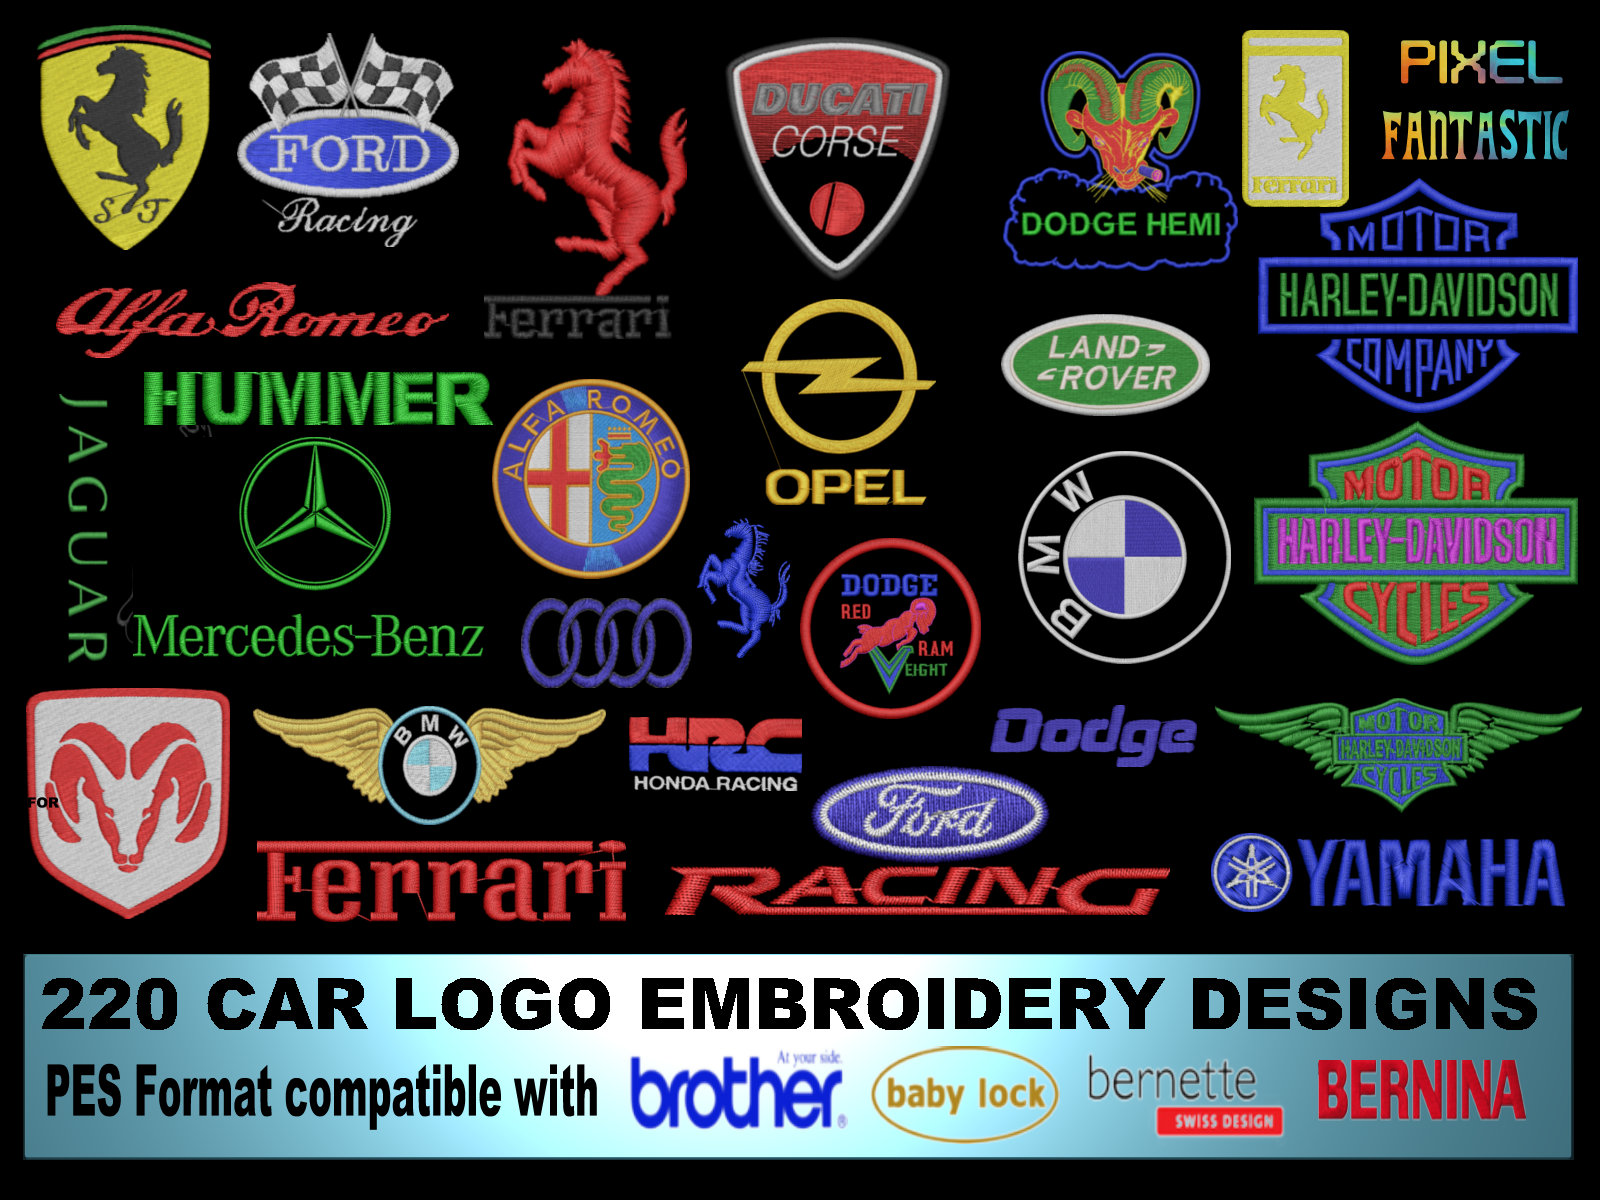 170,000 Brother Machine Embroidery Pattern Designs Collection on 32GB USB  Flash Drive PES Format Machine Embroidery Sewing Machines 